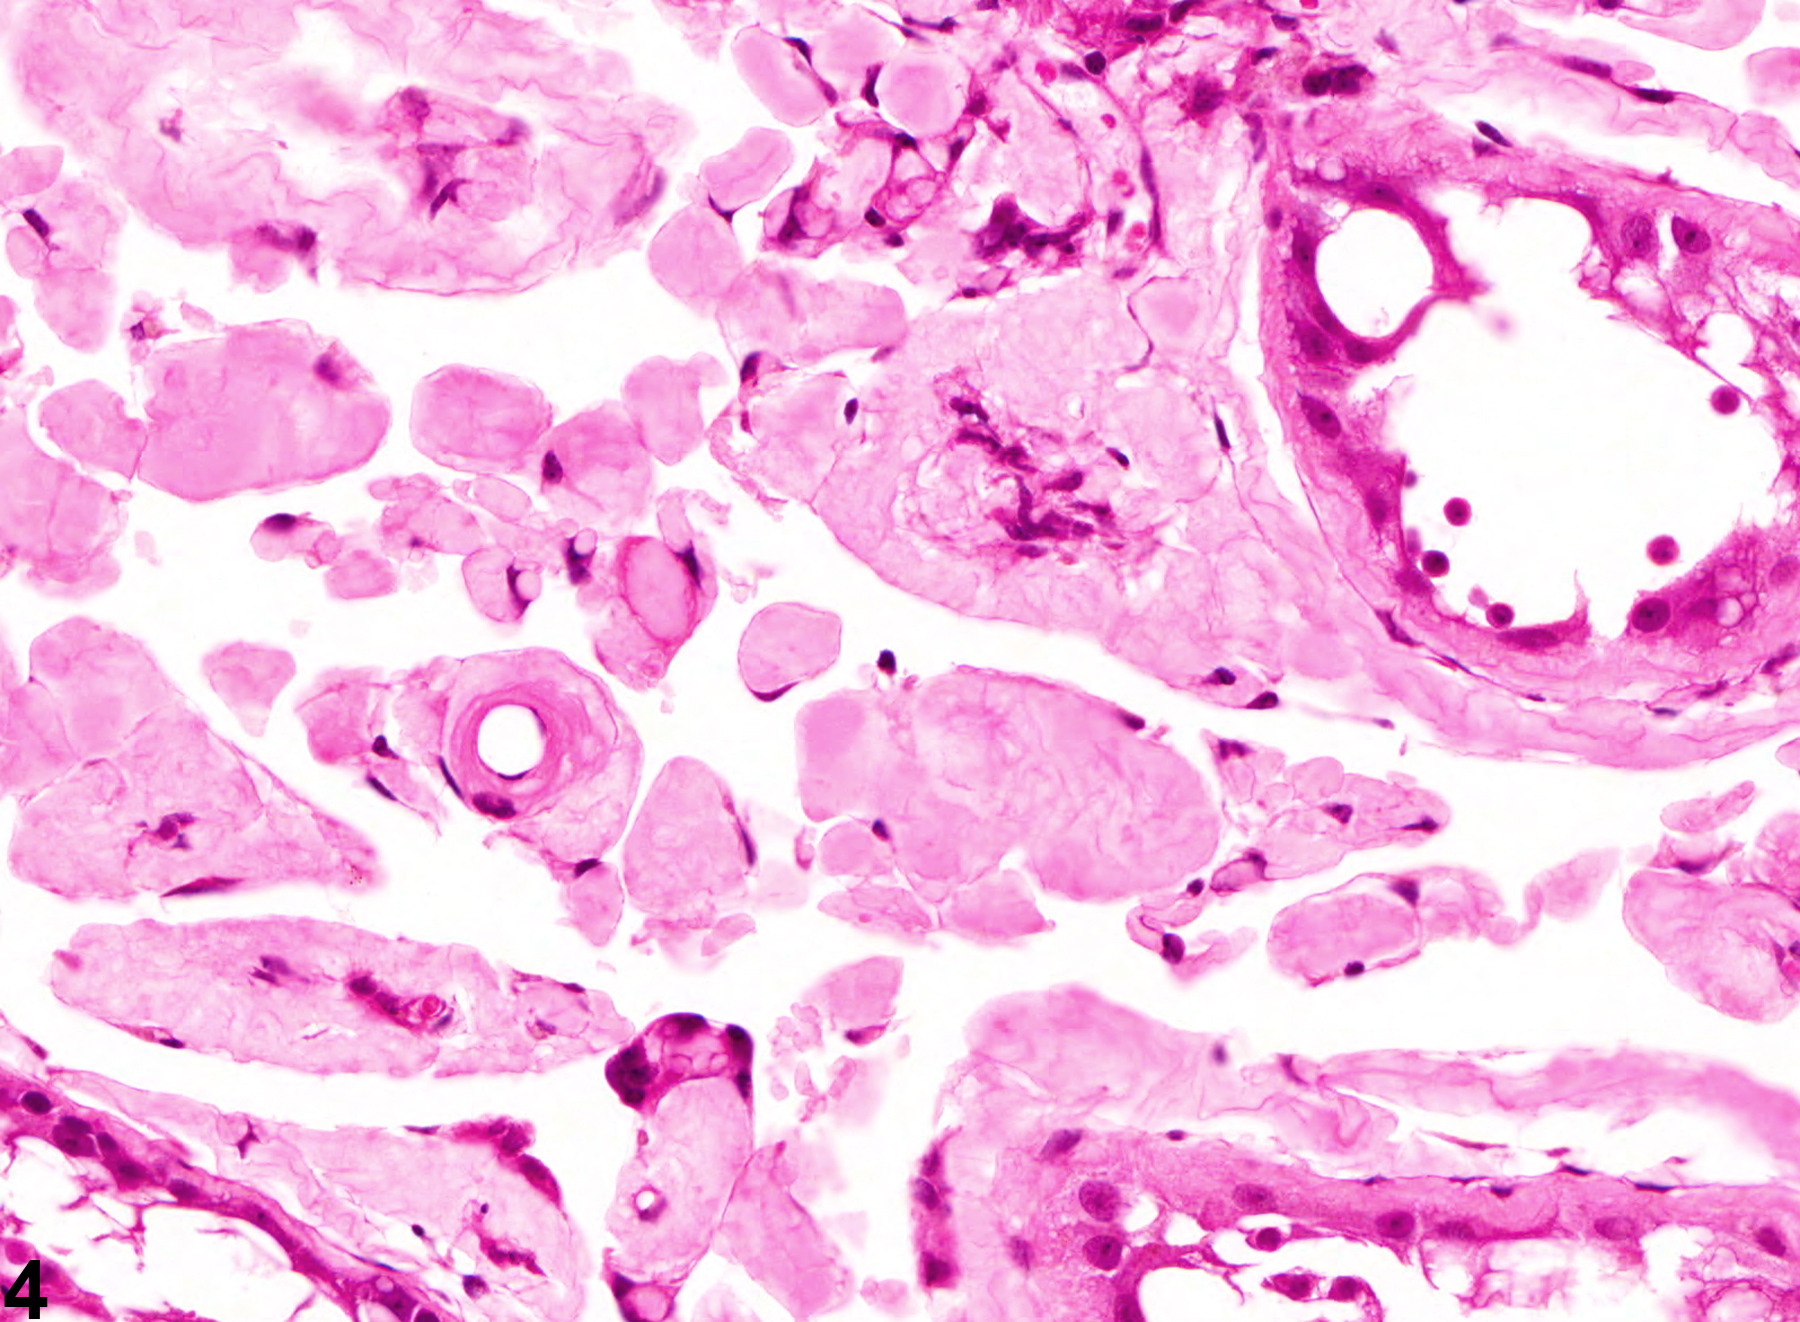 Image of amyloid in the testis from a male Swiss CD-1 mouse in a chronic study